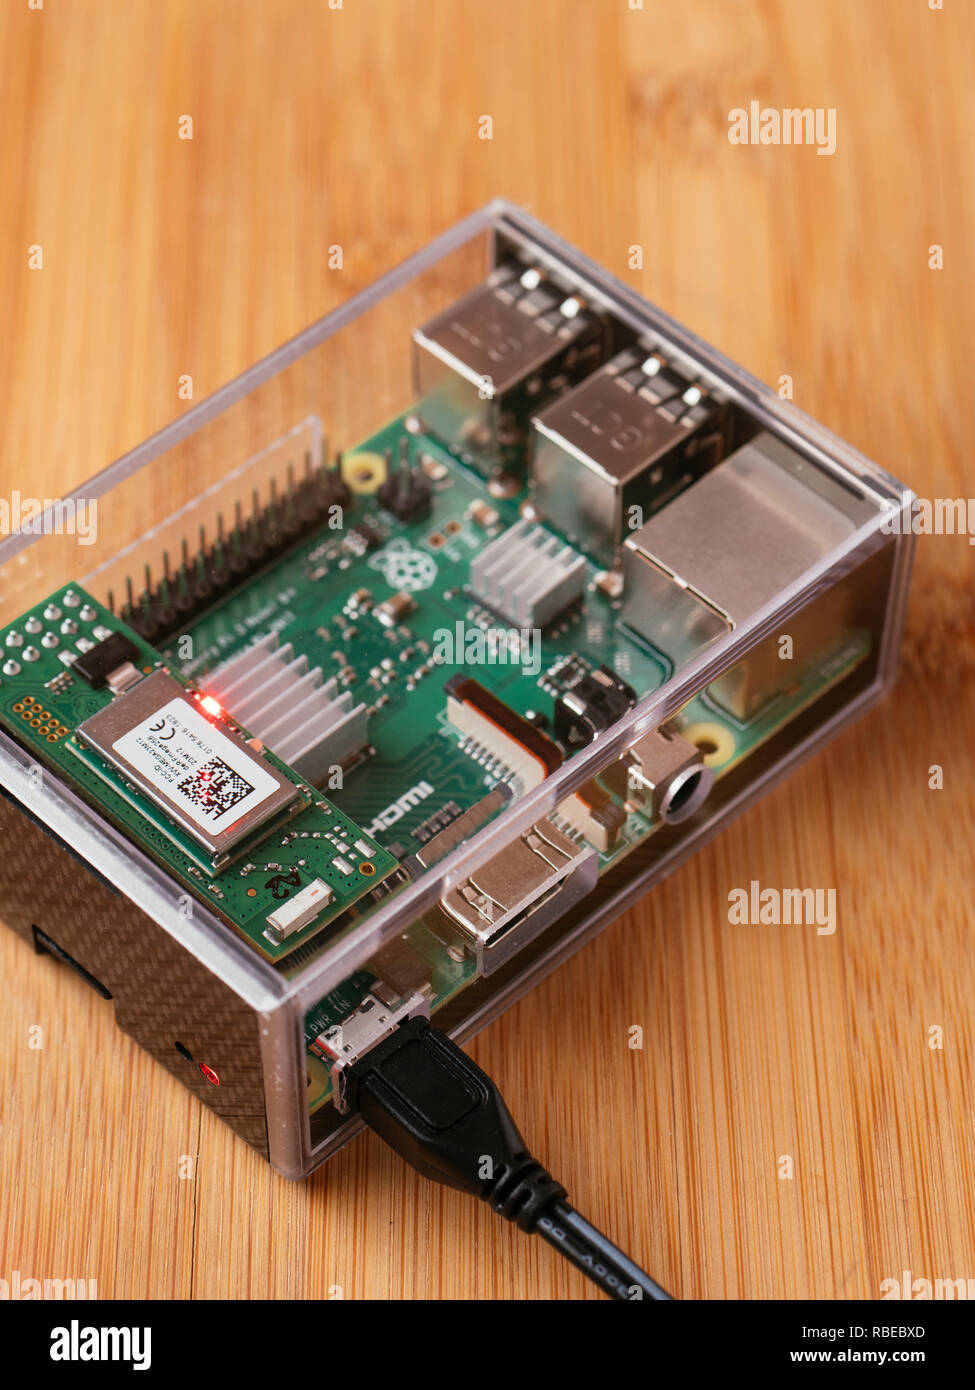 Raspberry Pi 3 Model B+ with ZigBee add-on board in a transparent case. Stock Photo